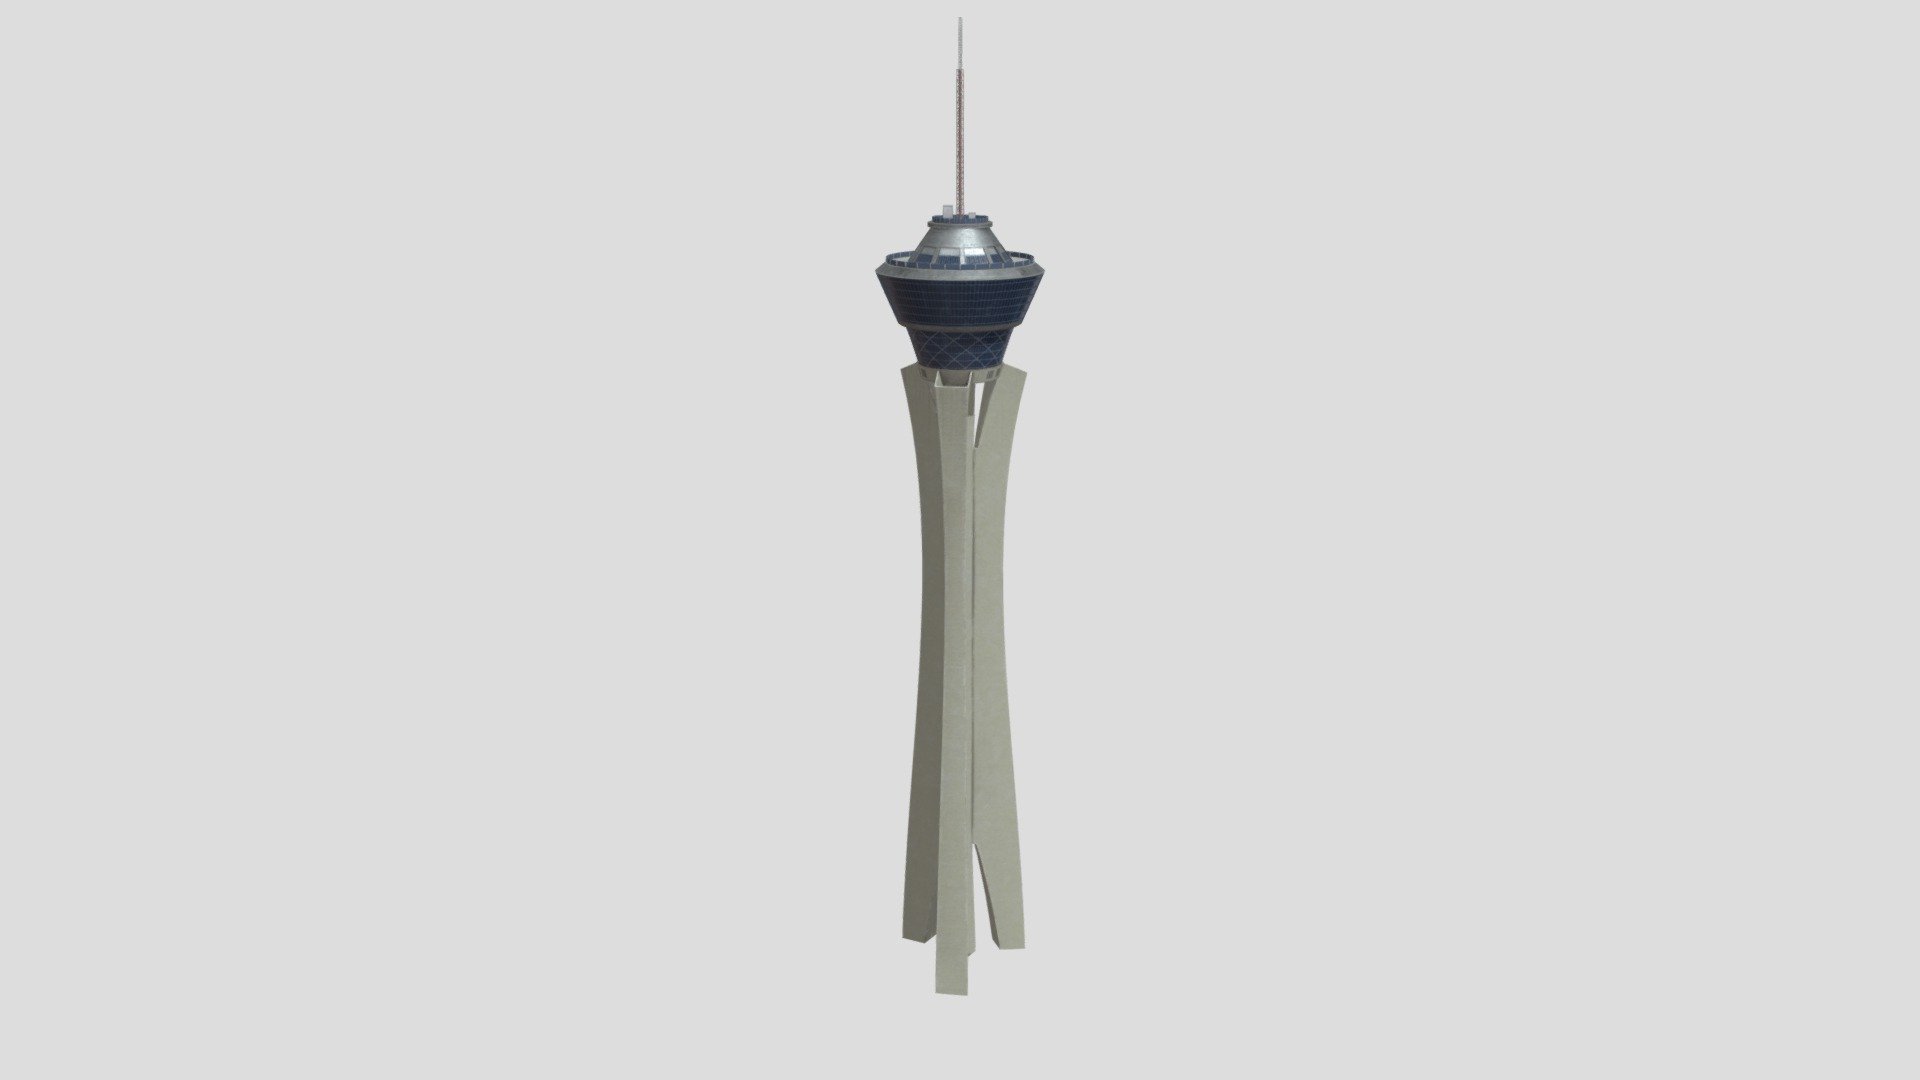 This Las Vegas Stratosphere is perfect for any vegas backdrop scene or just as the staple piece. This includes:

Stratosphere Mesh
Tower Top 4K Texture set
Tower Base 4K Texture Set
The mesh is UV Unrwapped and can eaily be retextured ! It also has vertex colors 3d model